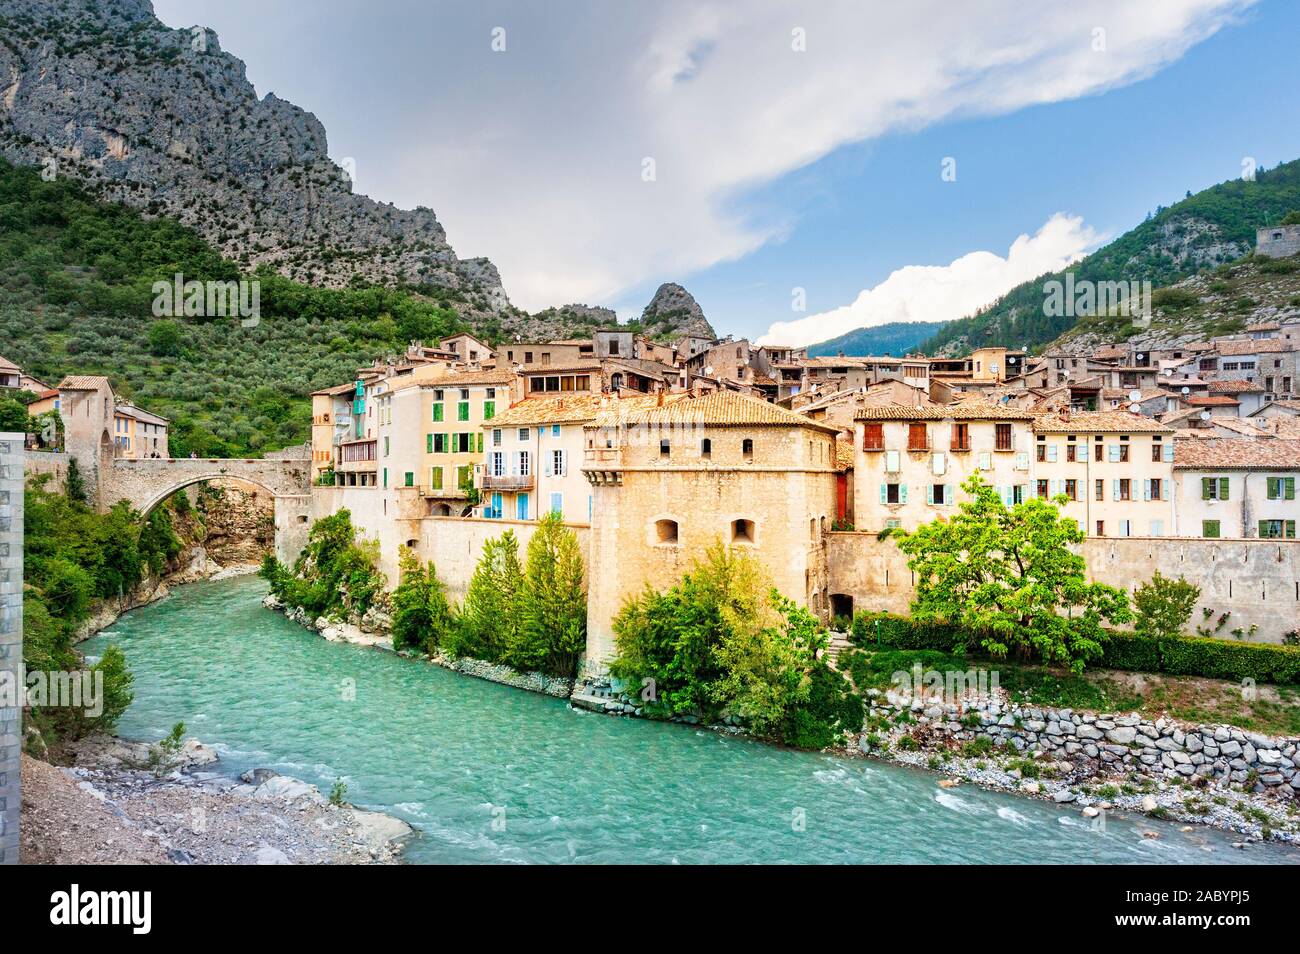 In the Alpes-de-Haute-Provence  the medieval walled town of Entrevaux lies above the river Var and below a mountaintop citadel. Stock Photo